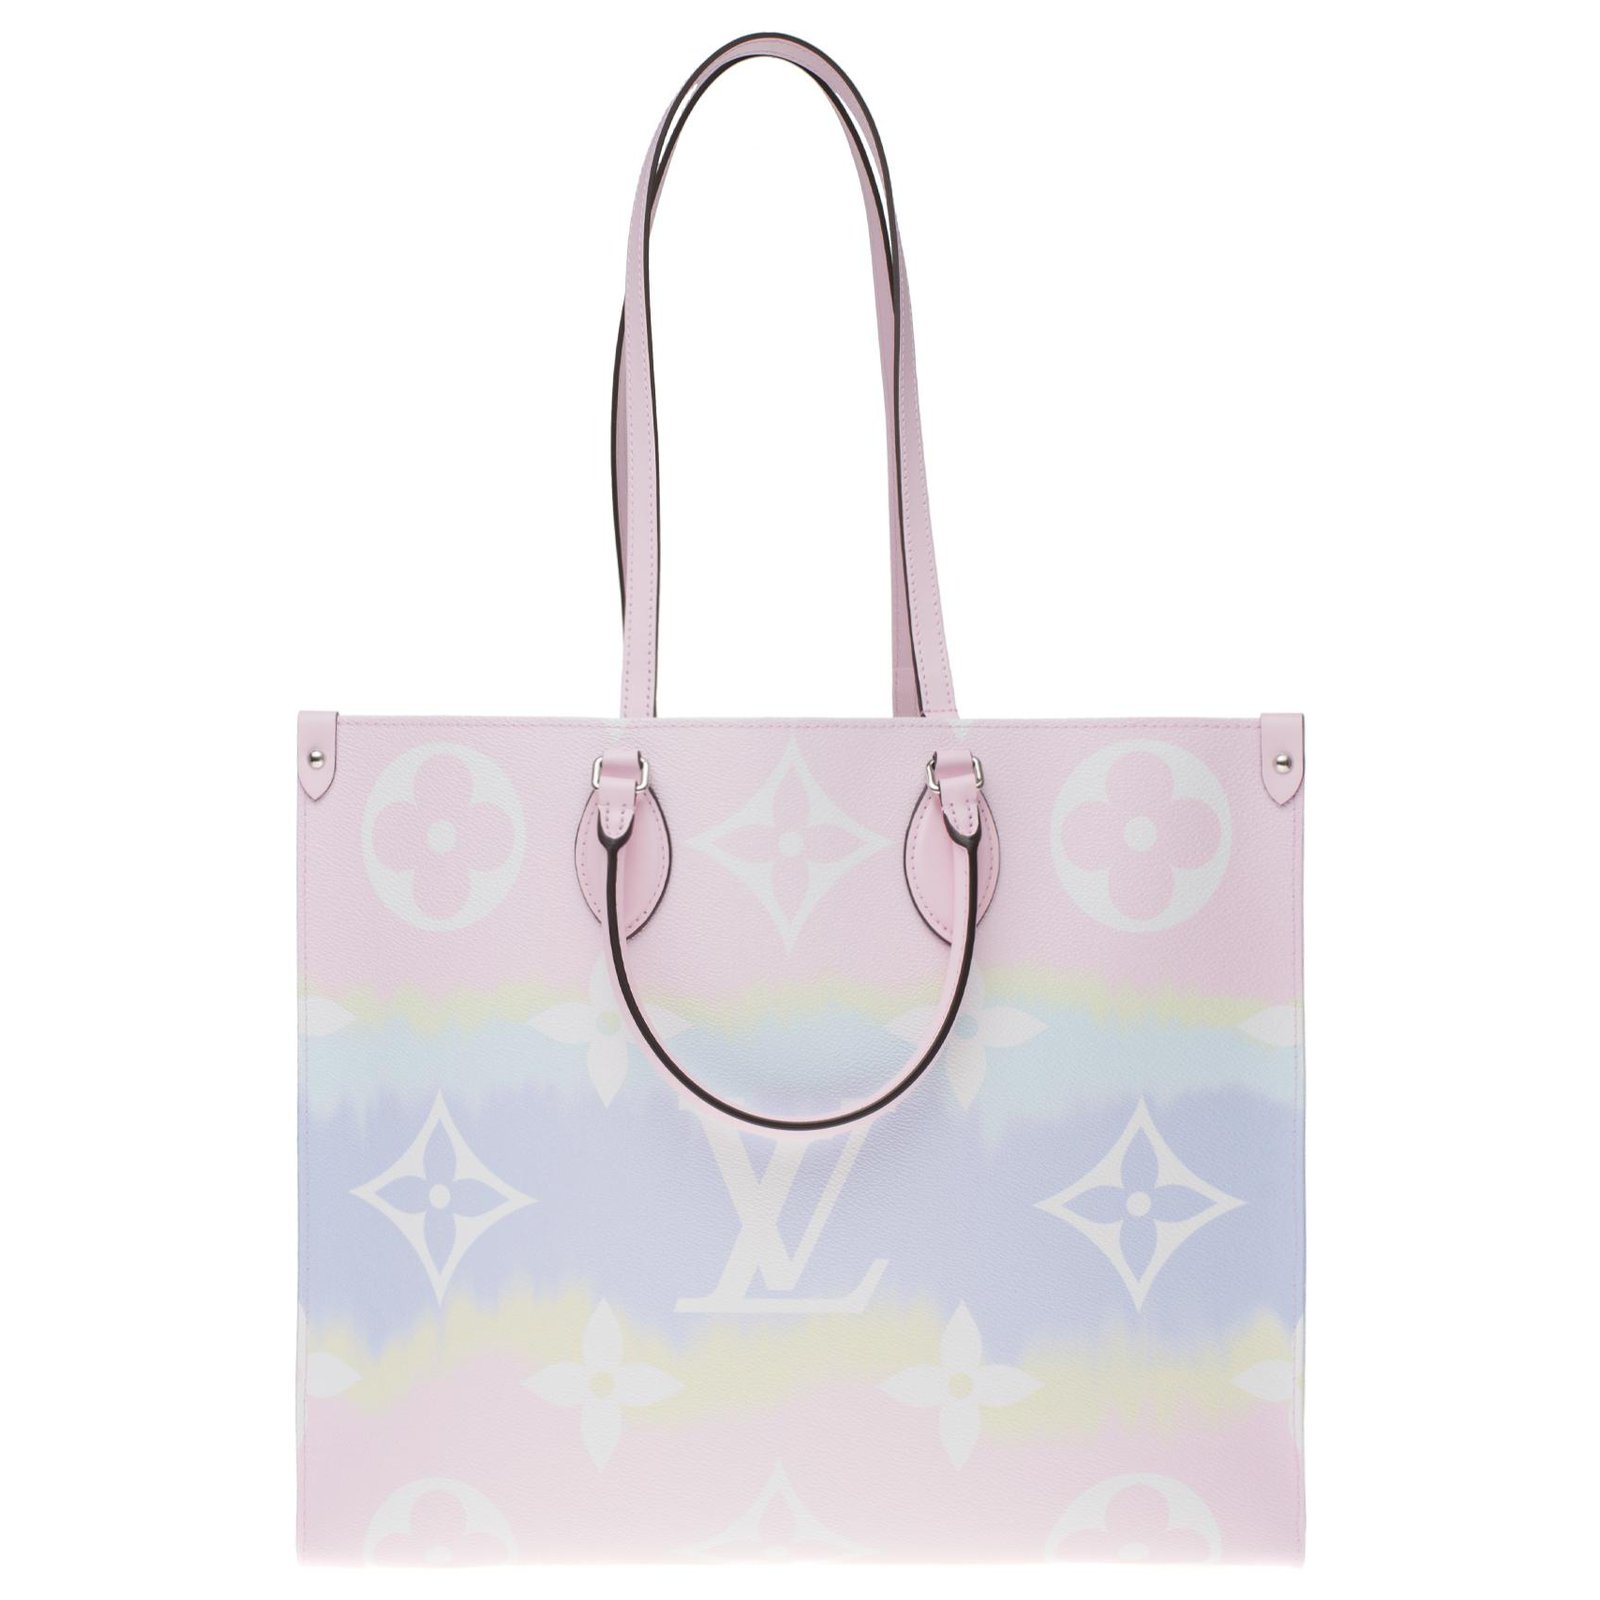 Louis Vuitton Bag Escale on the Go, Brand New 2020 Limited Edition